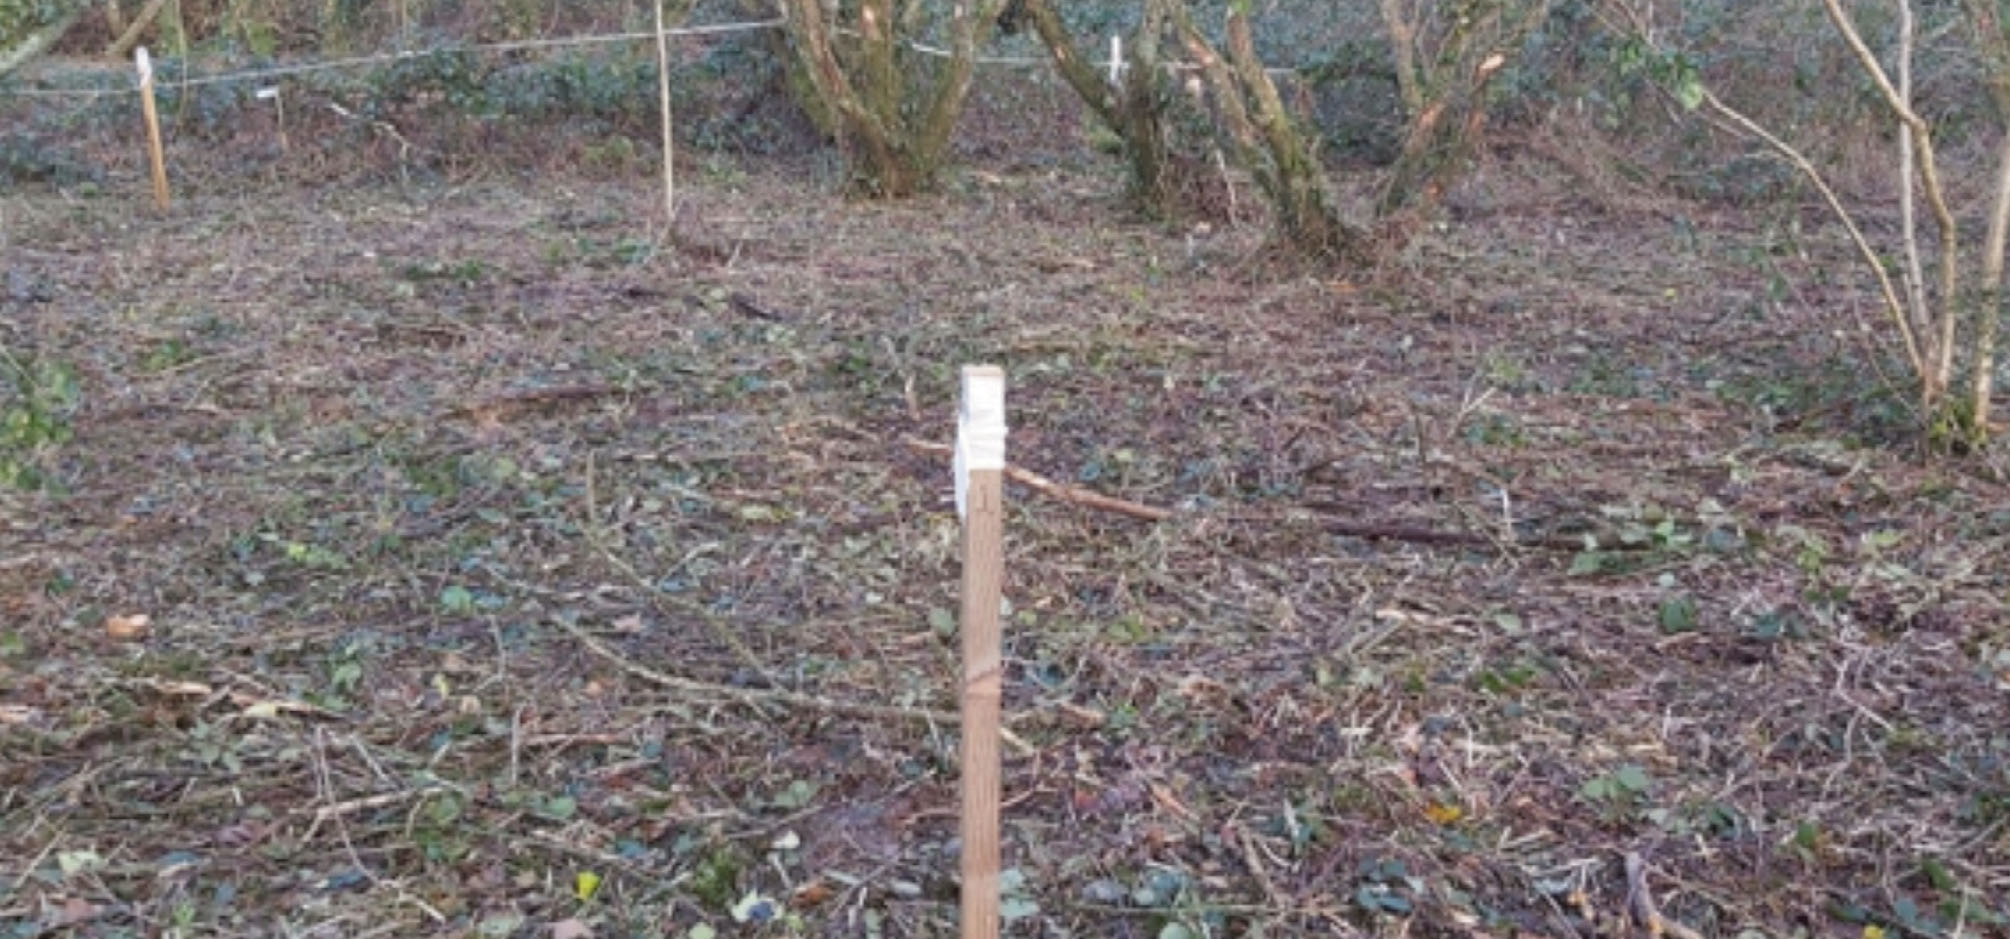 Wooden post in a wood showing area where Himalyan balsam plants have been removed. Taken January 2020 in Chapel Hill Wood, Castlemartin Corse, Pembrokeshire, Wales, UK